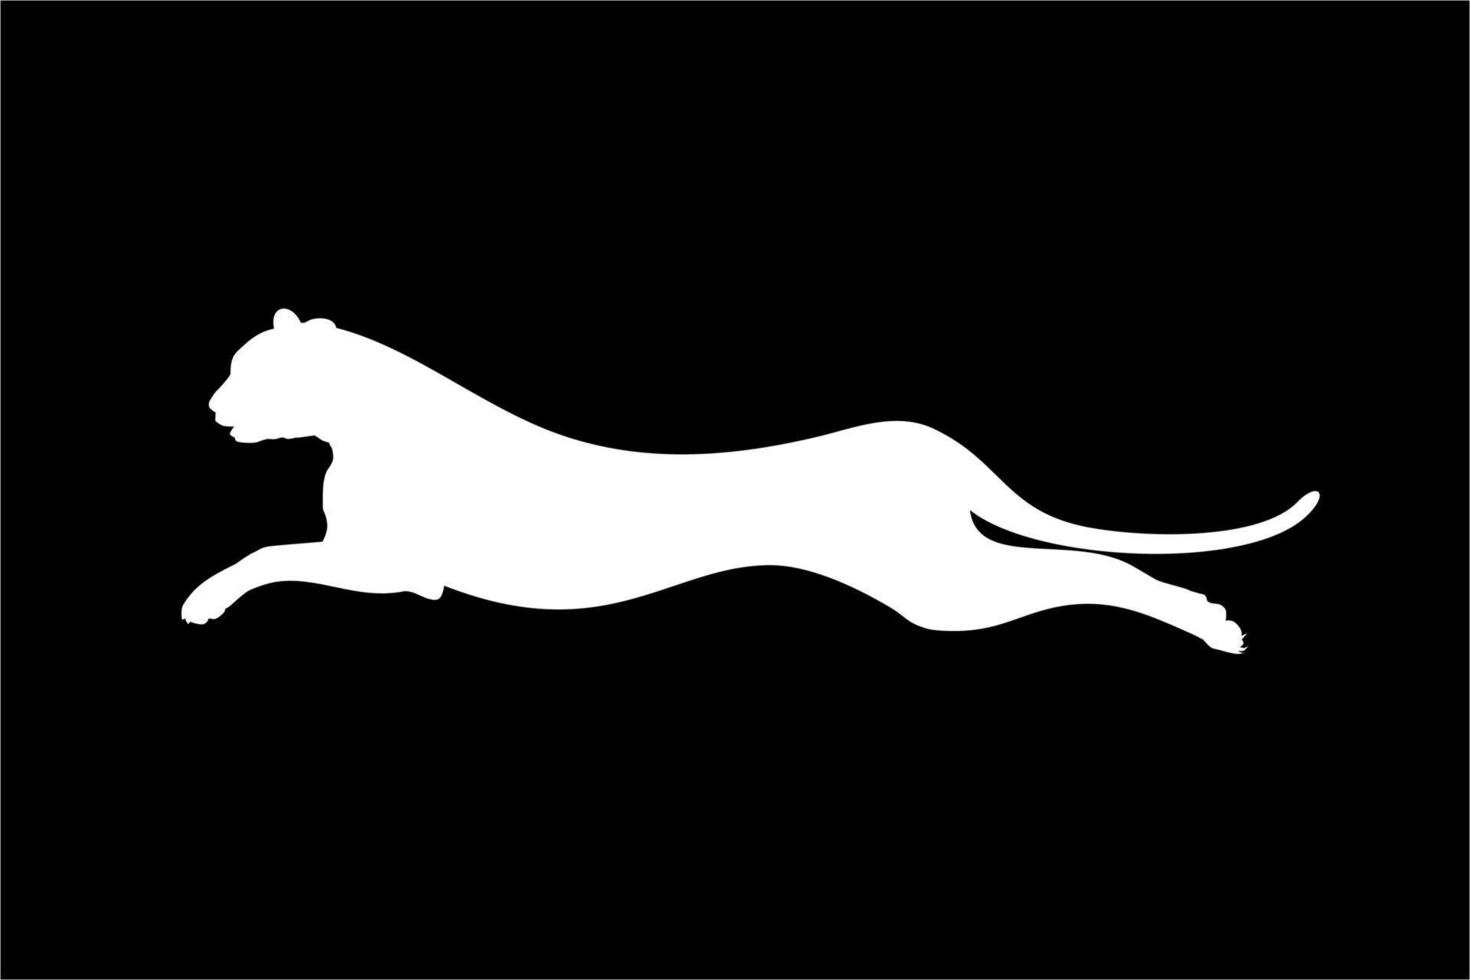 Silhouette of the Jumping Wild Cat, Tiger, Leopard, Panther, Cheetah, Jaguar and Big Cat Family, for Logo, Pictogram, Website, or Graphic Design Element. Vector Illustration